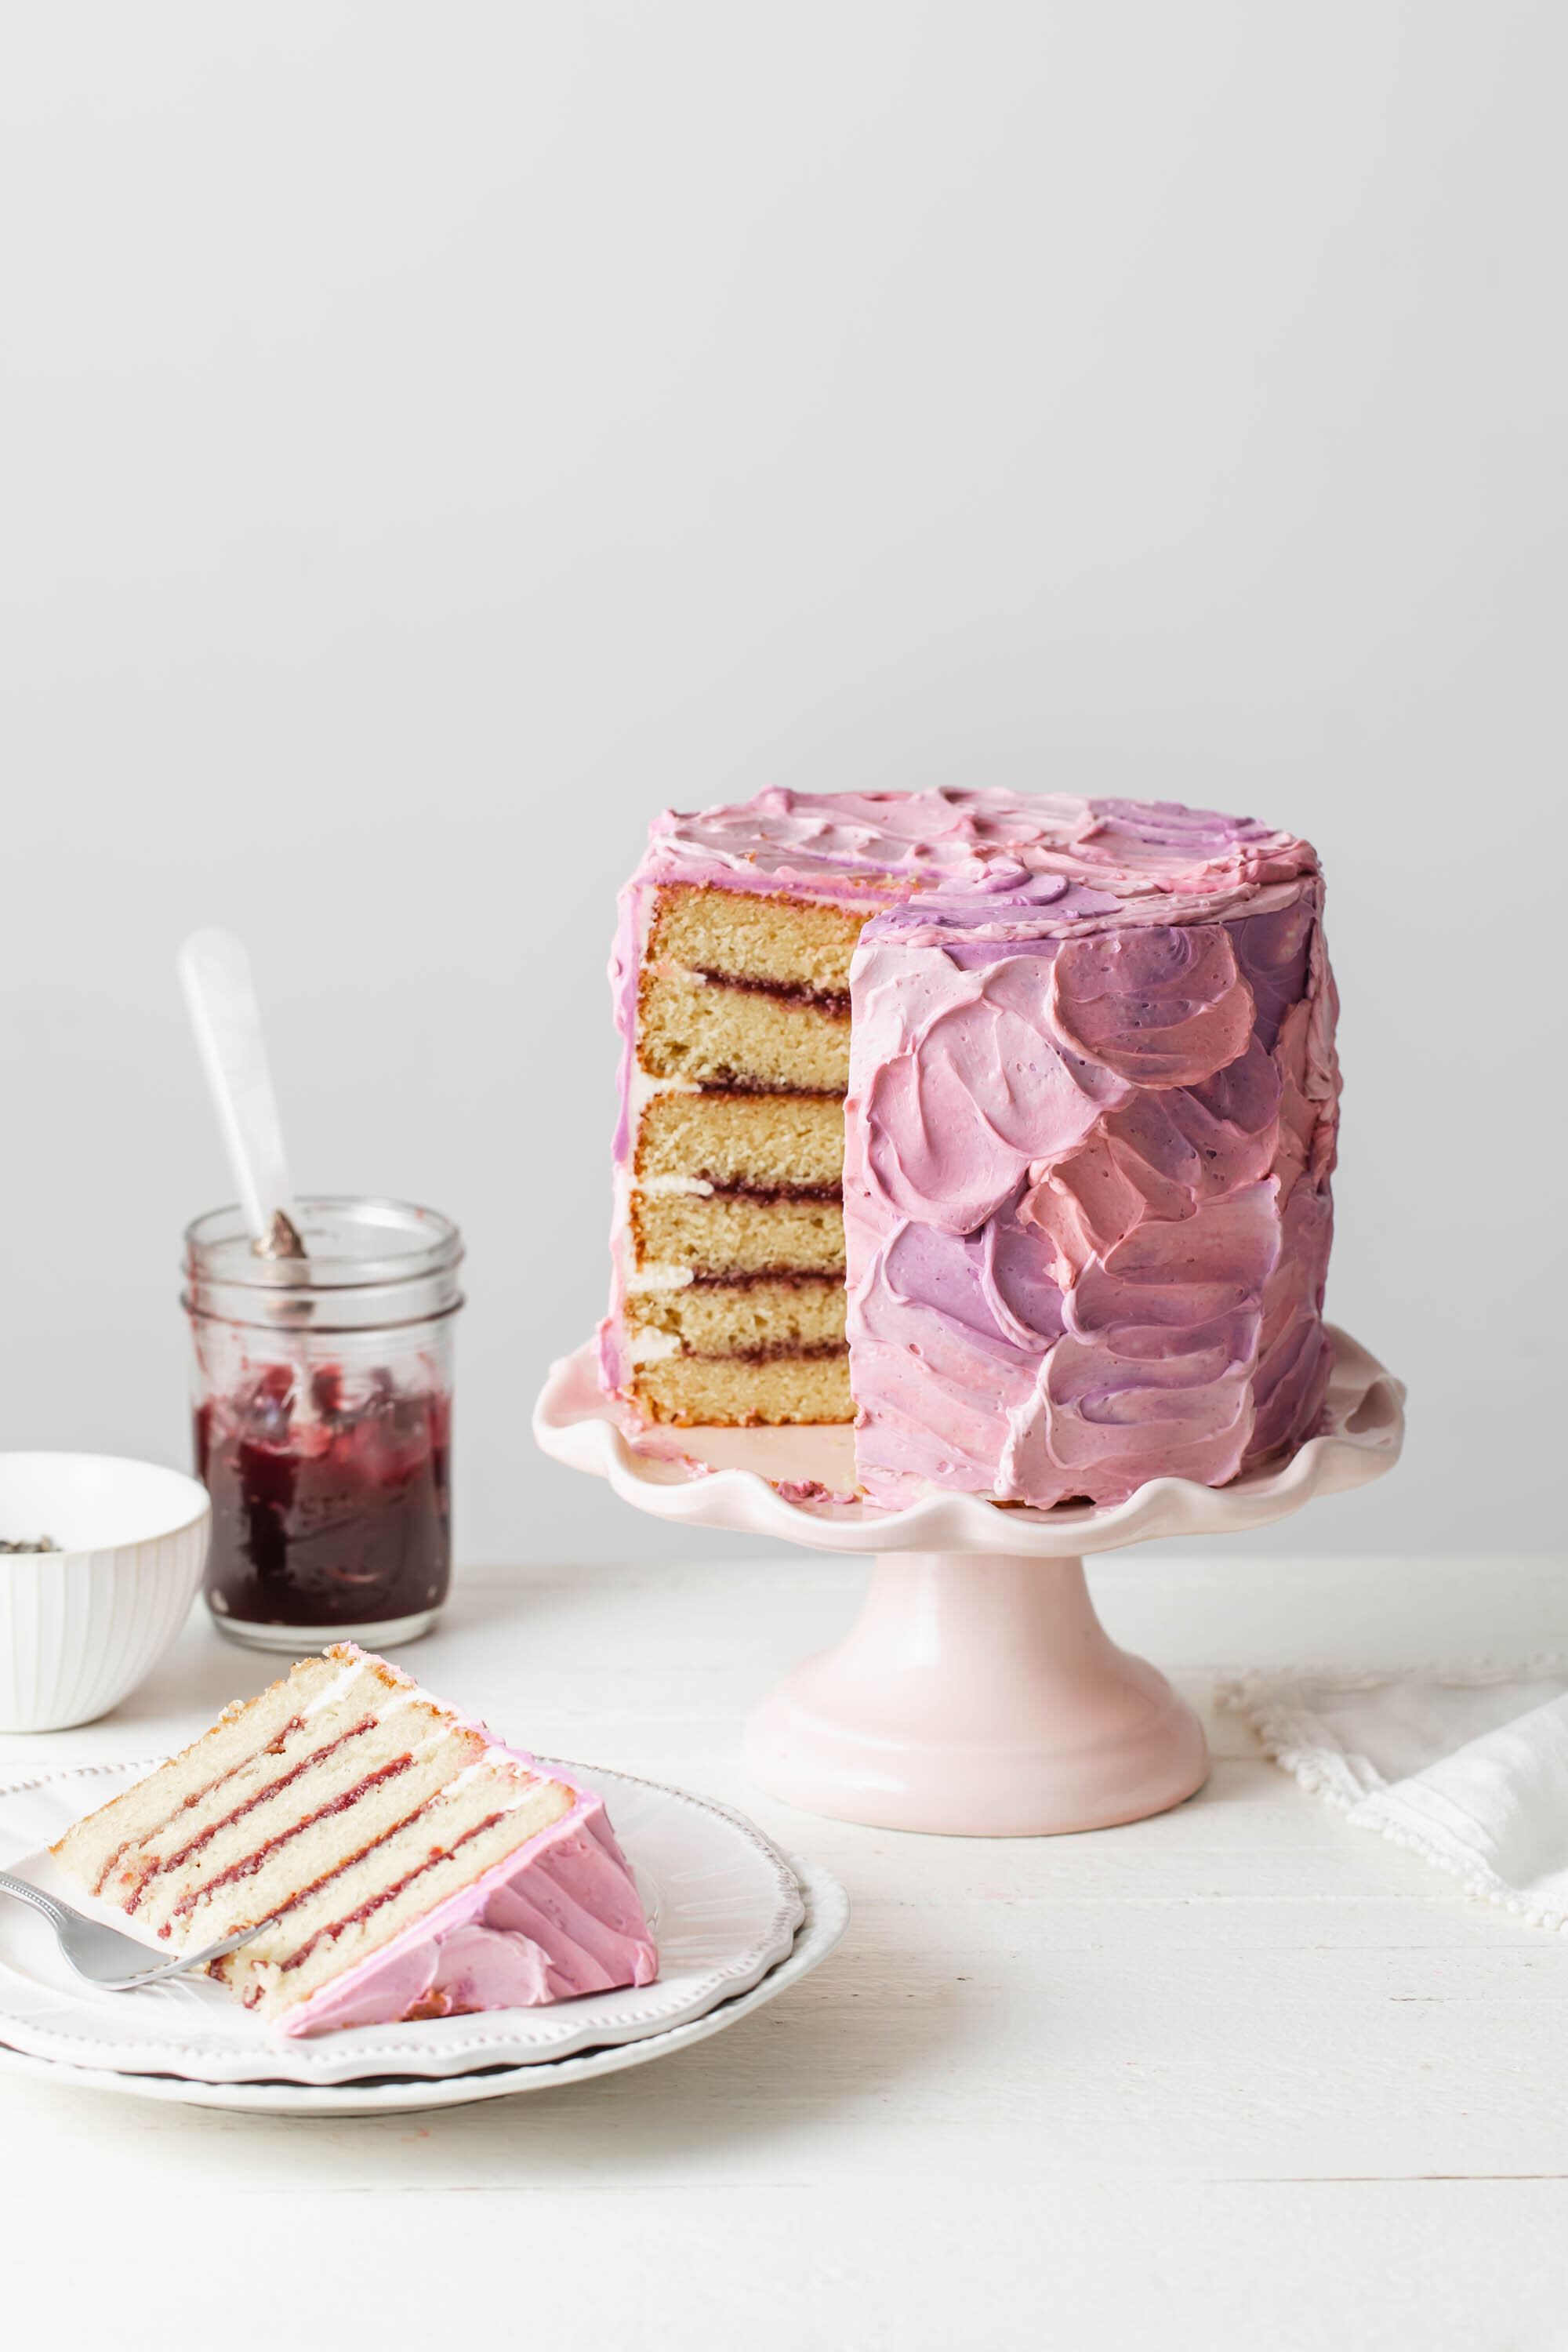 A 6-inch lavender cake with blackberry filling that is frosted with pink and purple Swiss meringue buttercream